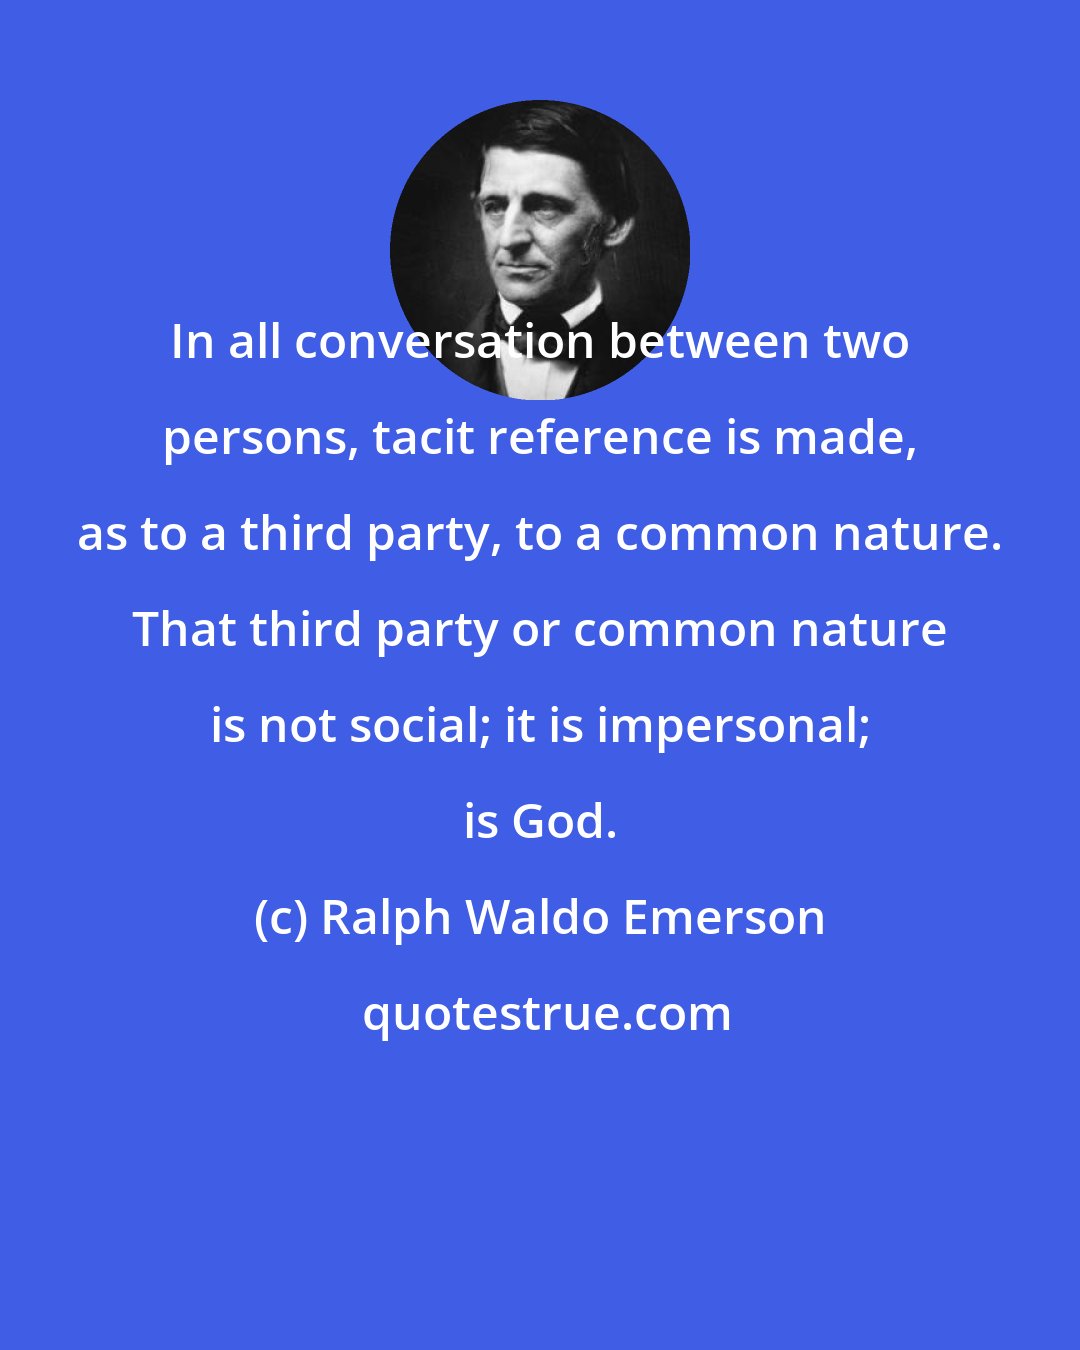 Ralph Waldo Emerson: In all conversation between two persons, tacit reference is made, as to a third party, to a common nature. That third party or common nature is not social; it is impersonal; is God.